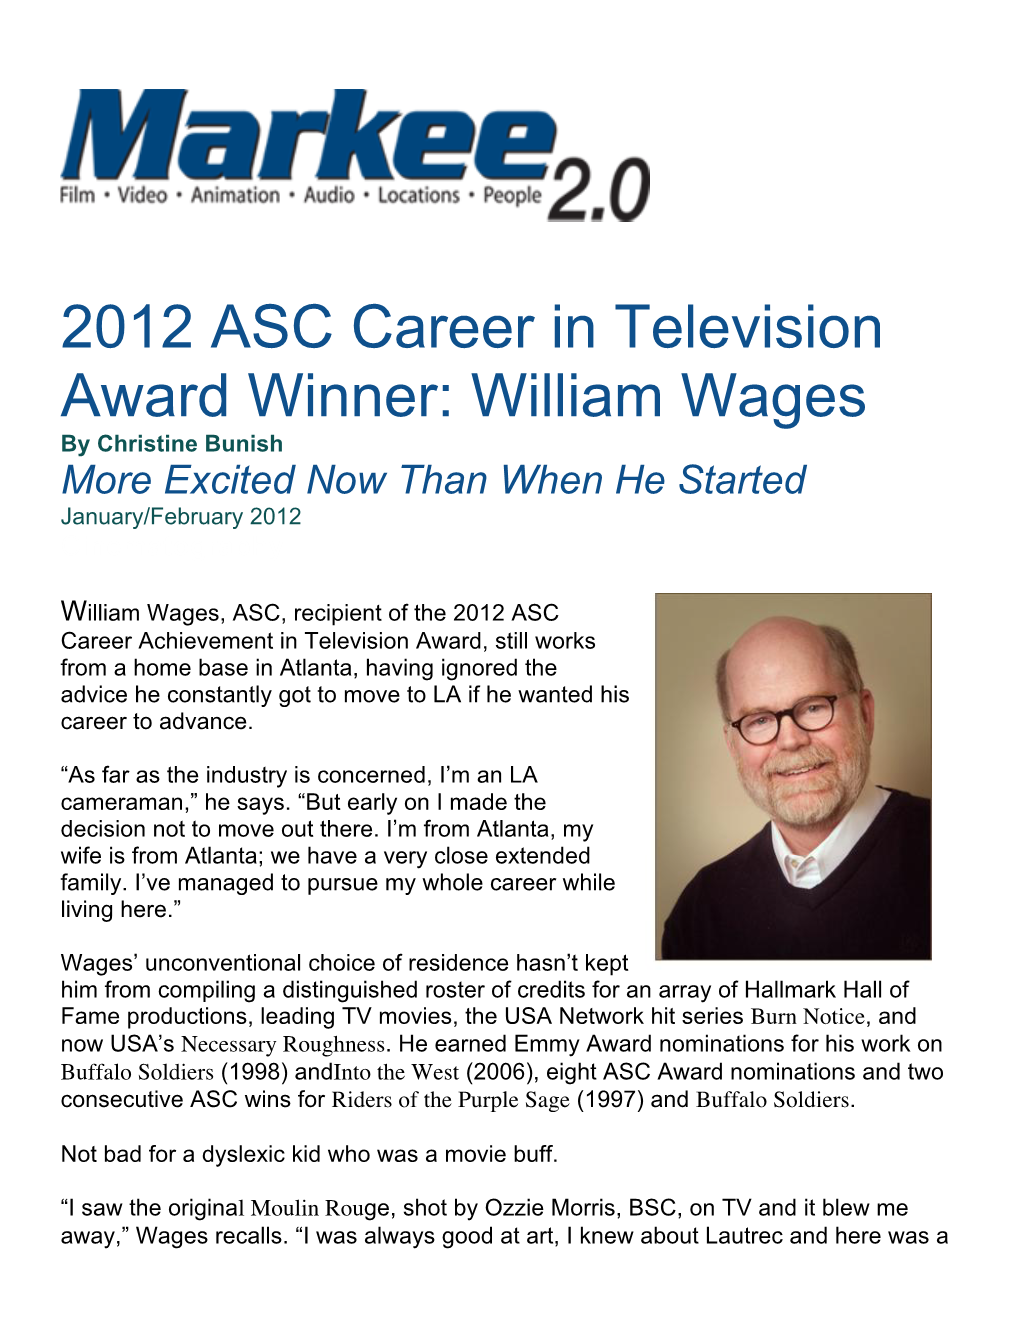 2012 ASC Career in Television Award Winner: William Wages by Christine Bunish More Excited Now Than When He Started January/February 2012 Cinematography